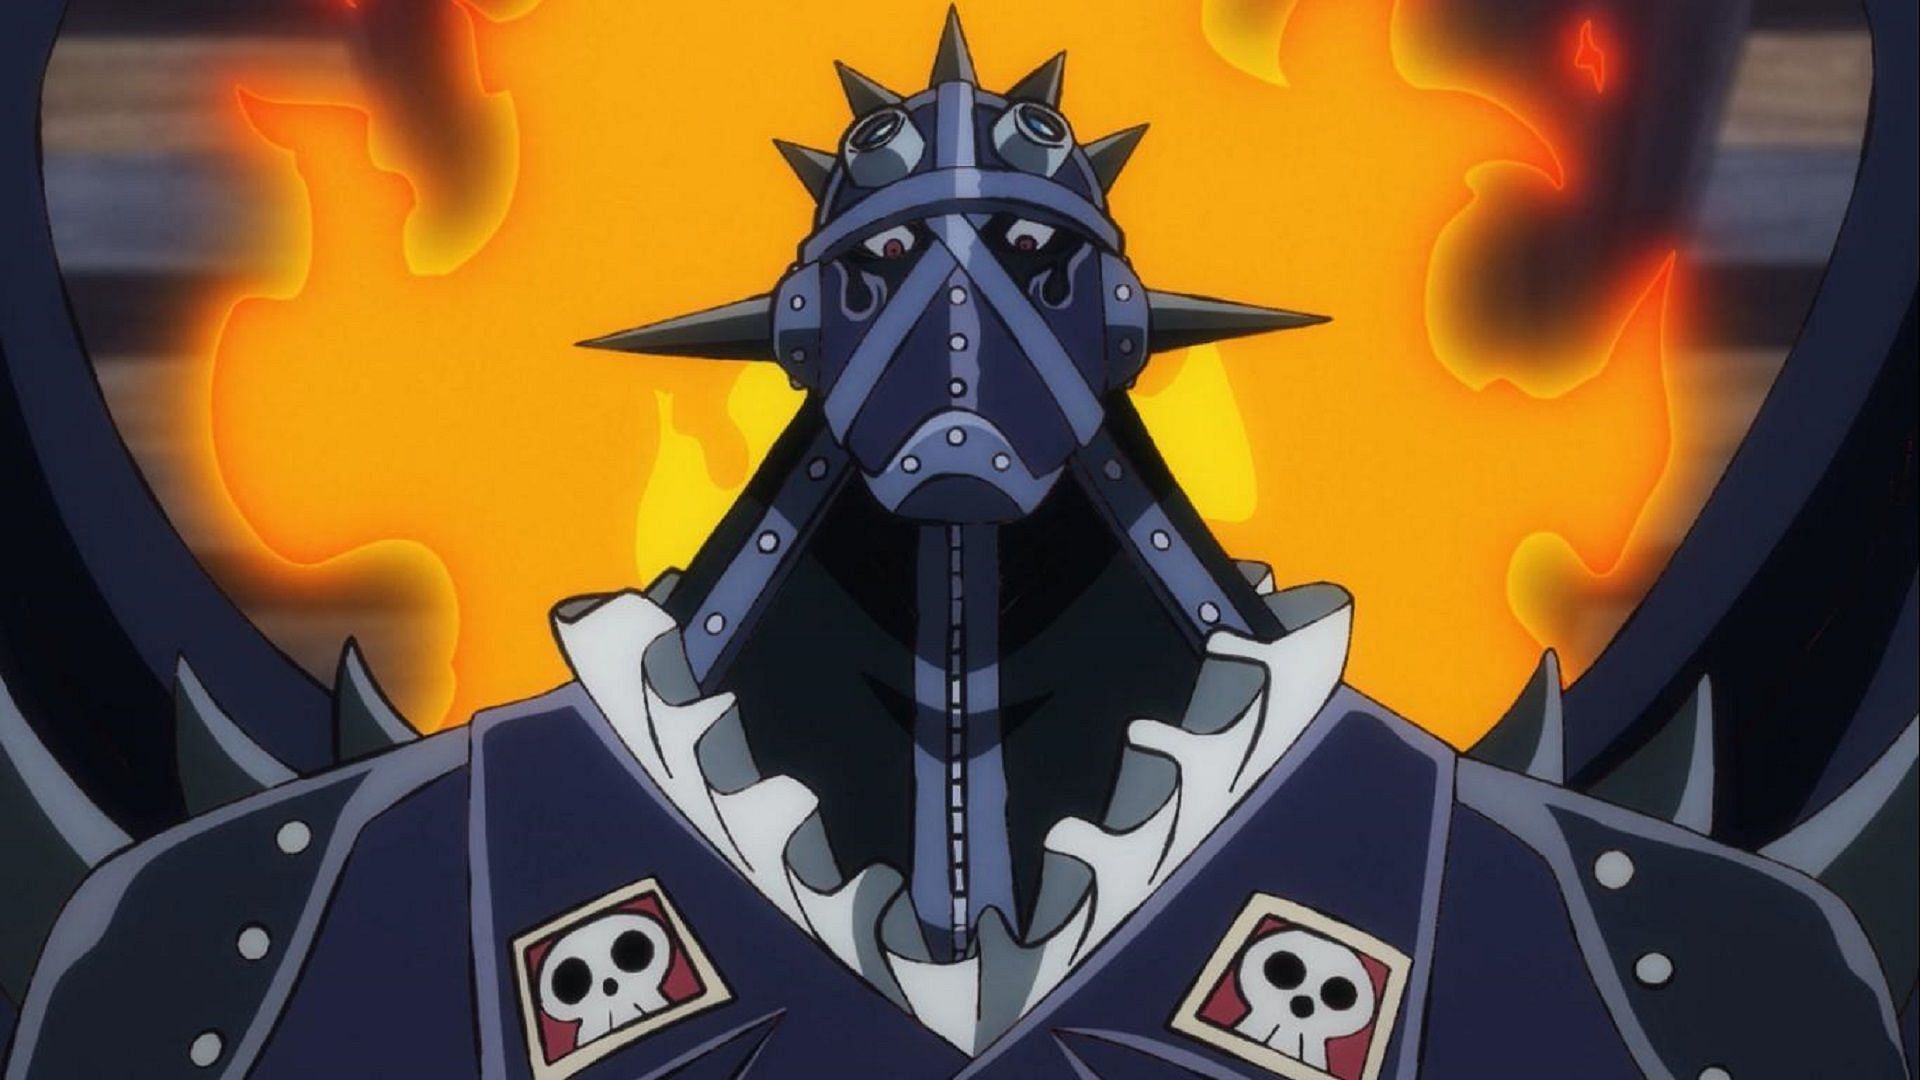 King certainly earned his spot as one of my top favorite characters in One  Piece. Here are my favorite frames from 1062 : r/OnePiece